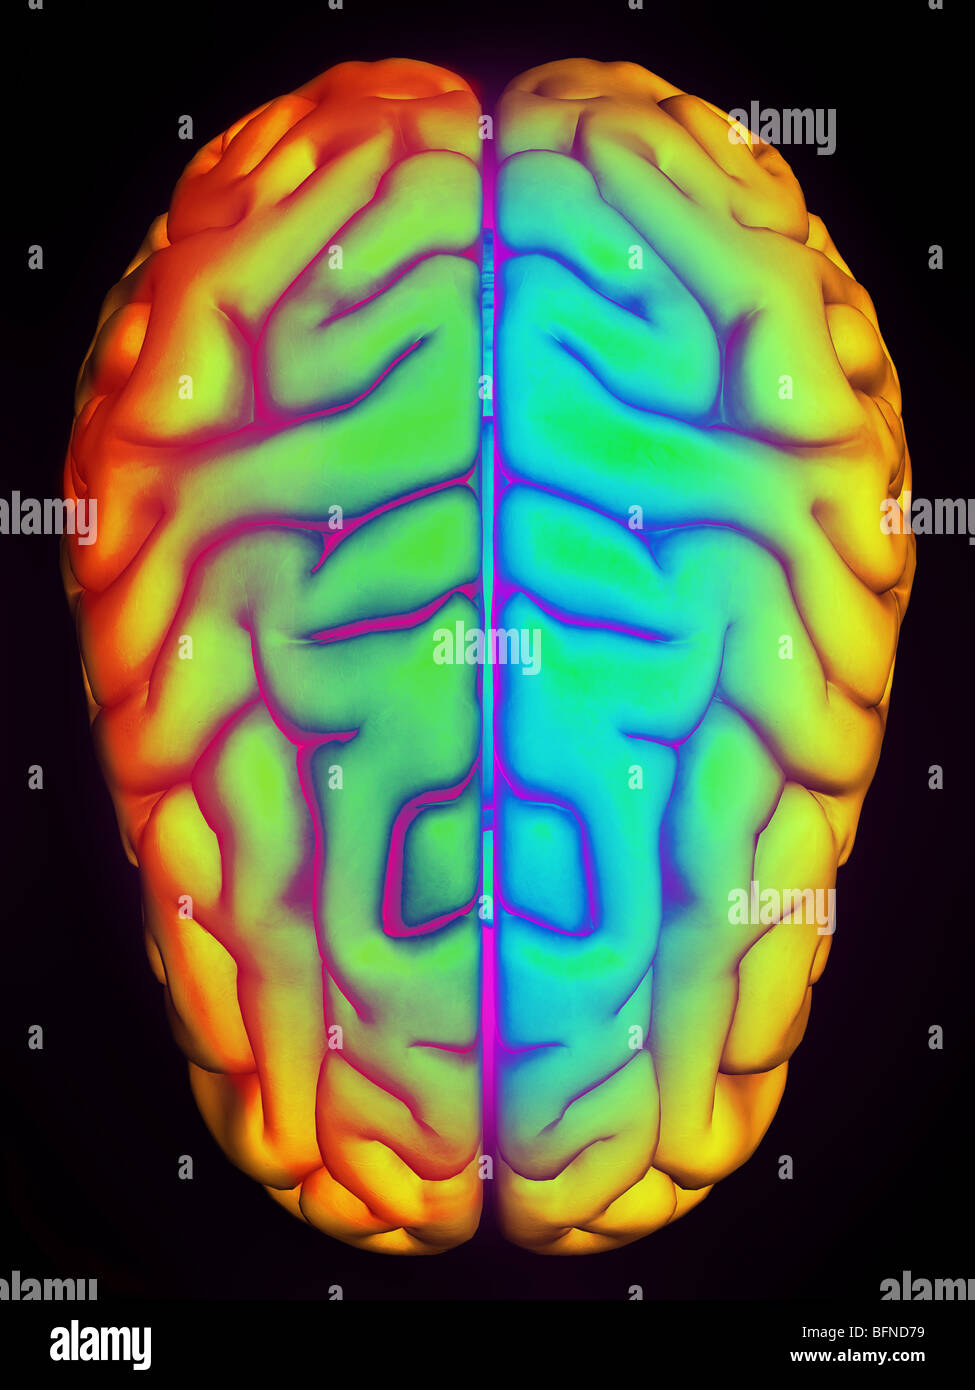 Illustration of the human brain seen from above Stock Photo